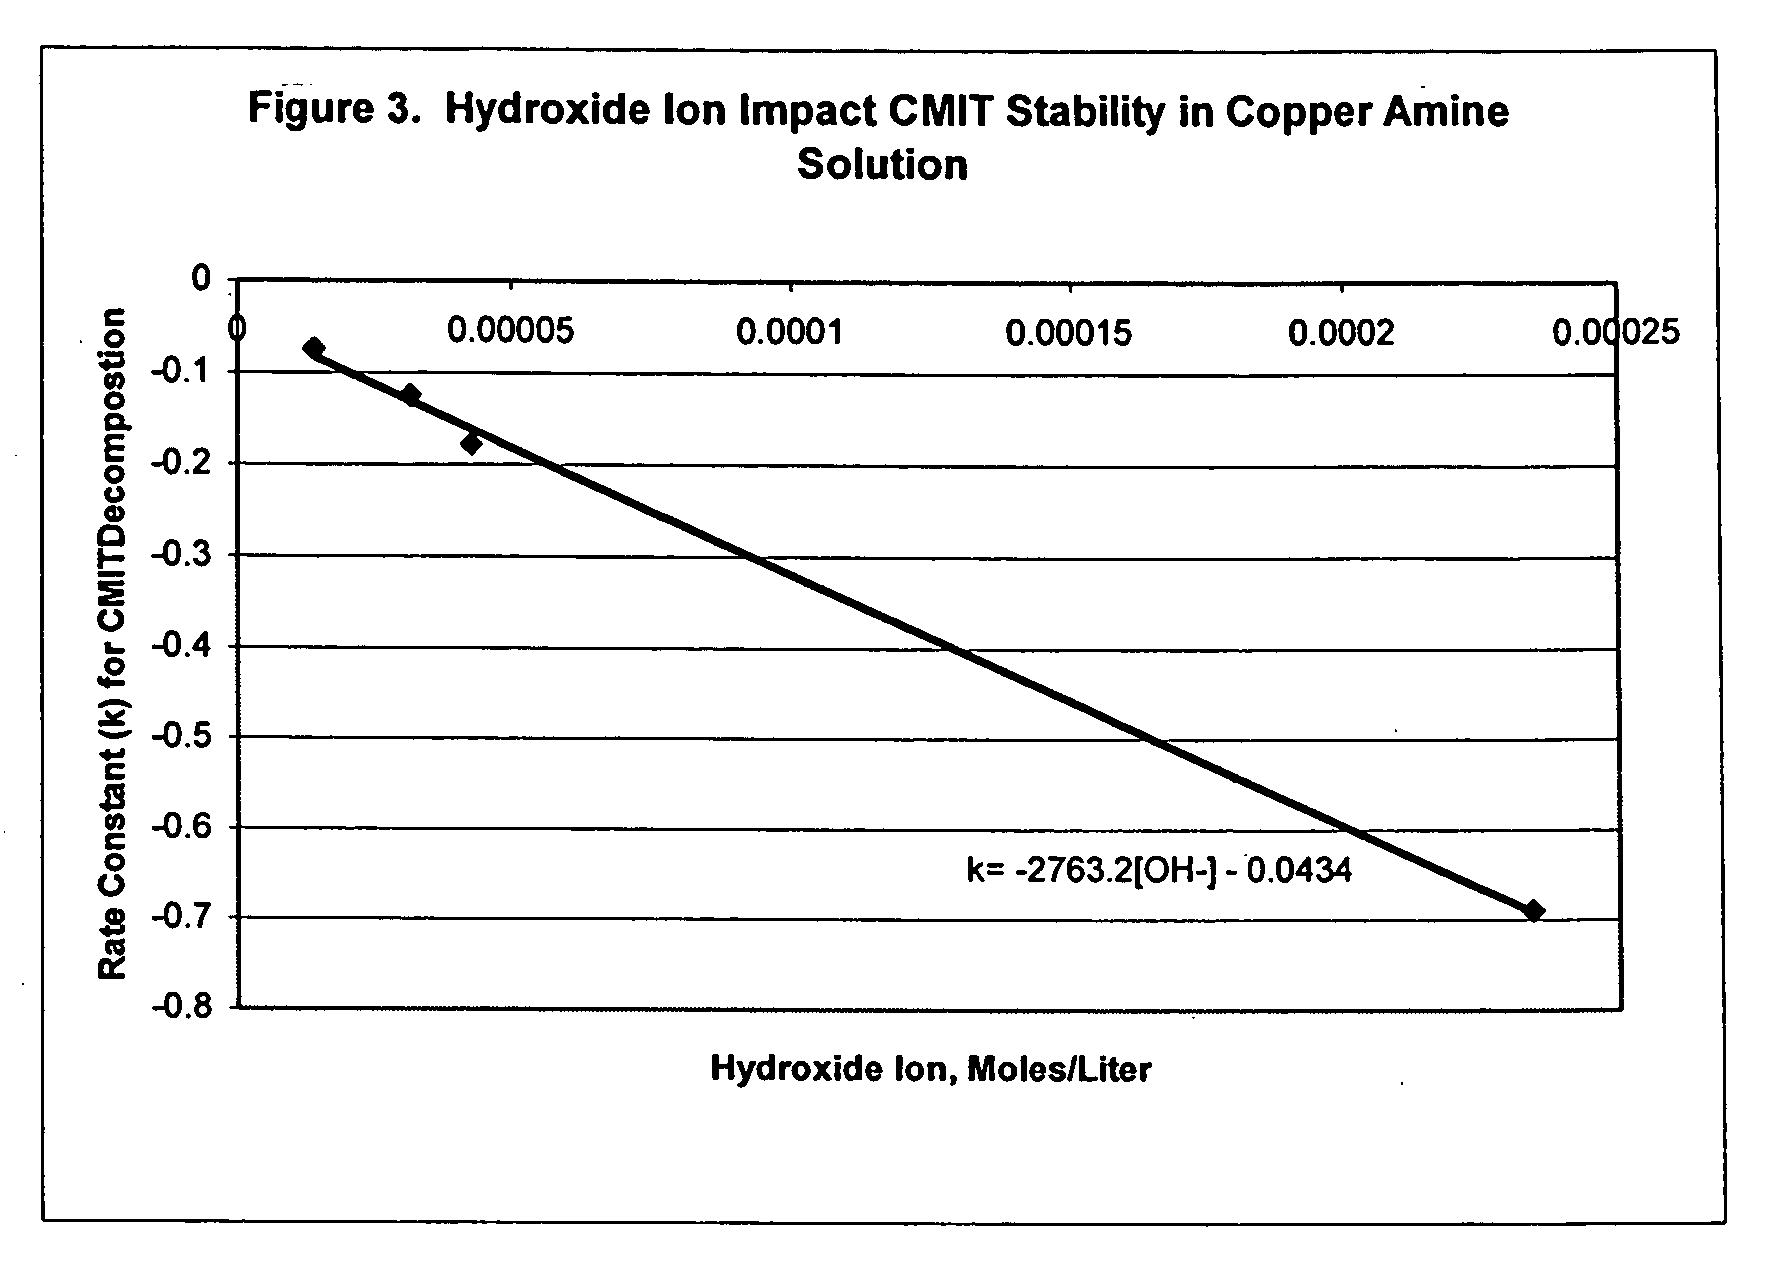 Penetration improvement of copper amine solutions into dried wood by addition of carbon dioxide